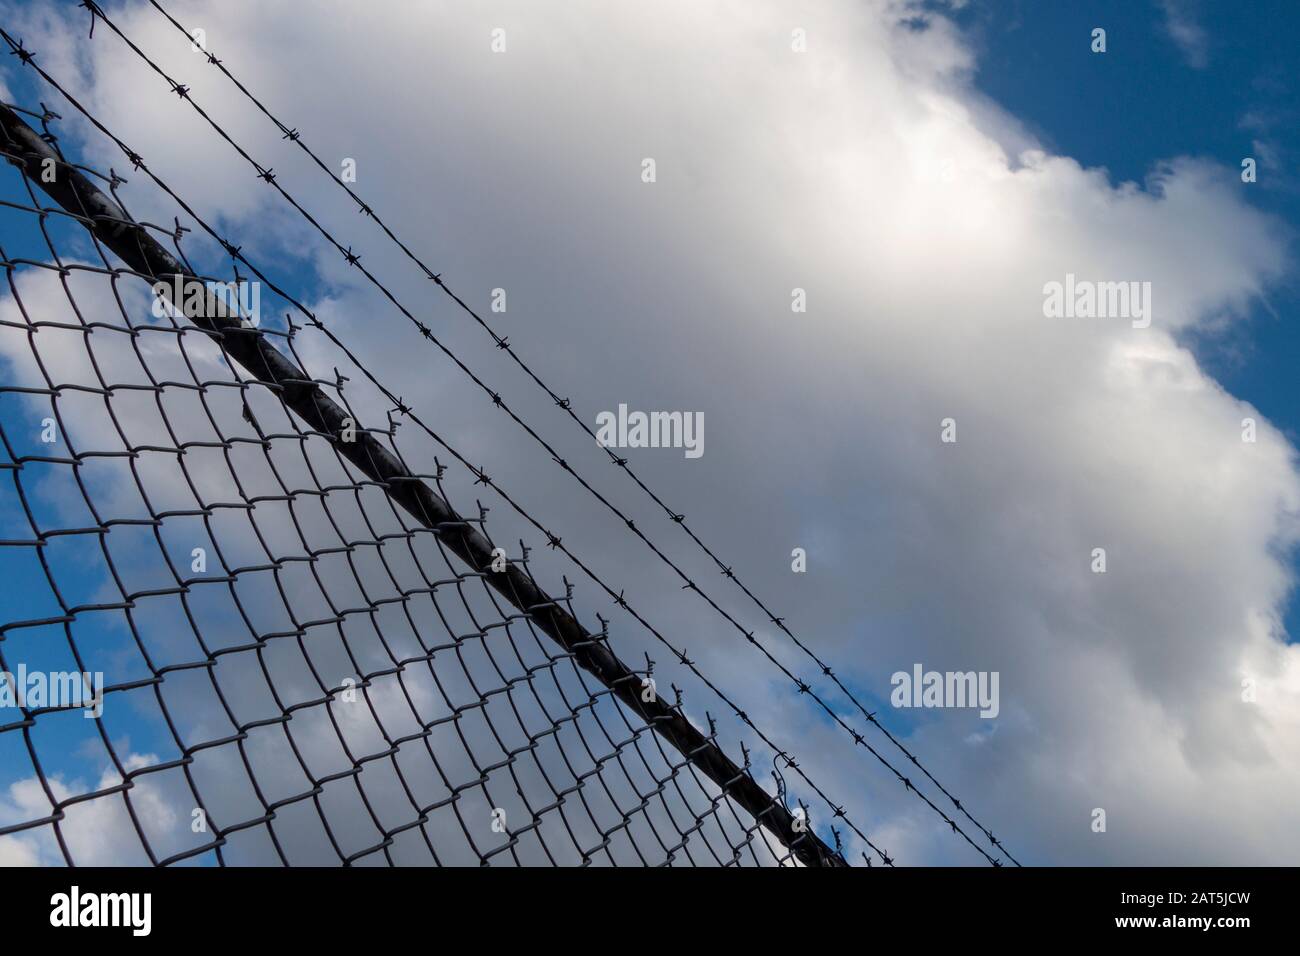 blocked off area with barbed wire fence Stock Photo